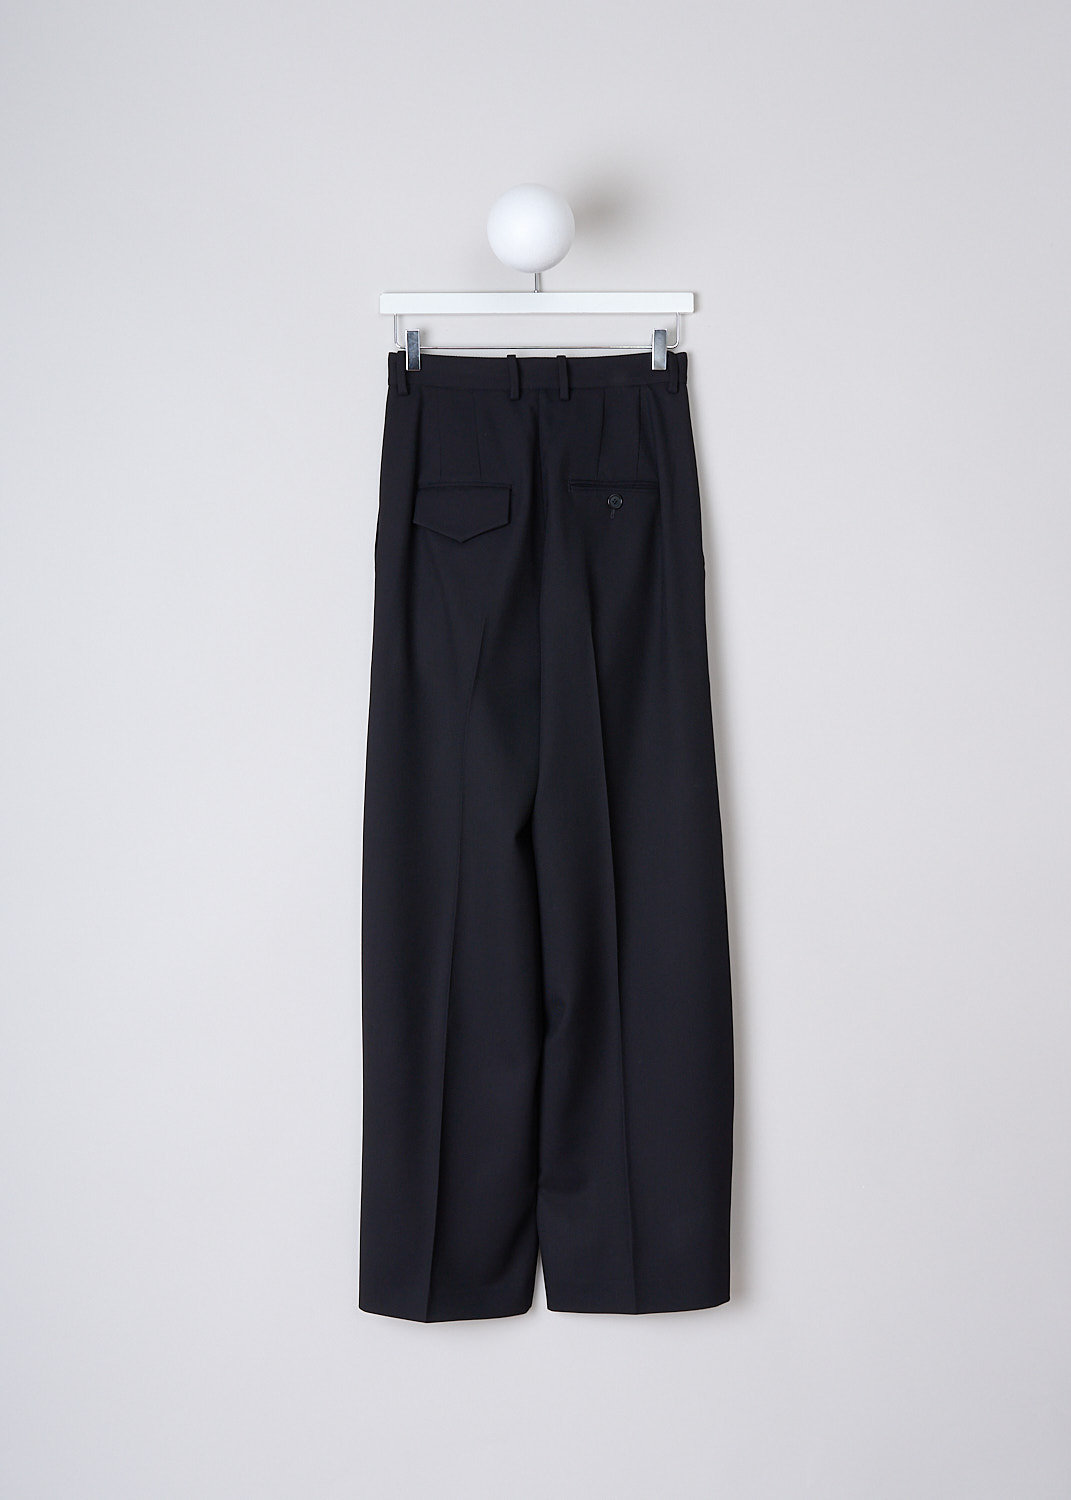 PLAN C, NAVY BLACK WOOL DRILL PANTS, PNCAA55L08_TW039_00B98, Black, Blue, Back, These navy black drill wool pants  have a waistband with belt loops and a button and zip closure. The pants are high-waisted with wide pant legs. Pressed centre creases run along the length of the pant legs. These pants have slanted pockets in the front. In the back, the pants have one flap welt pocket and one buttoned welt pocket. 
